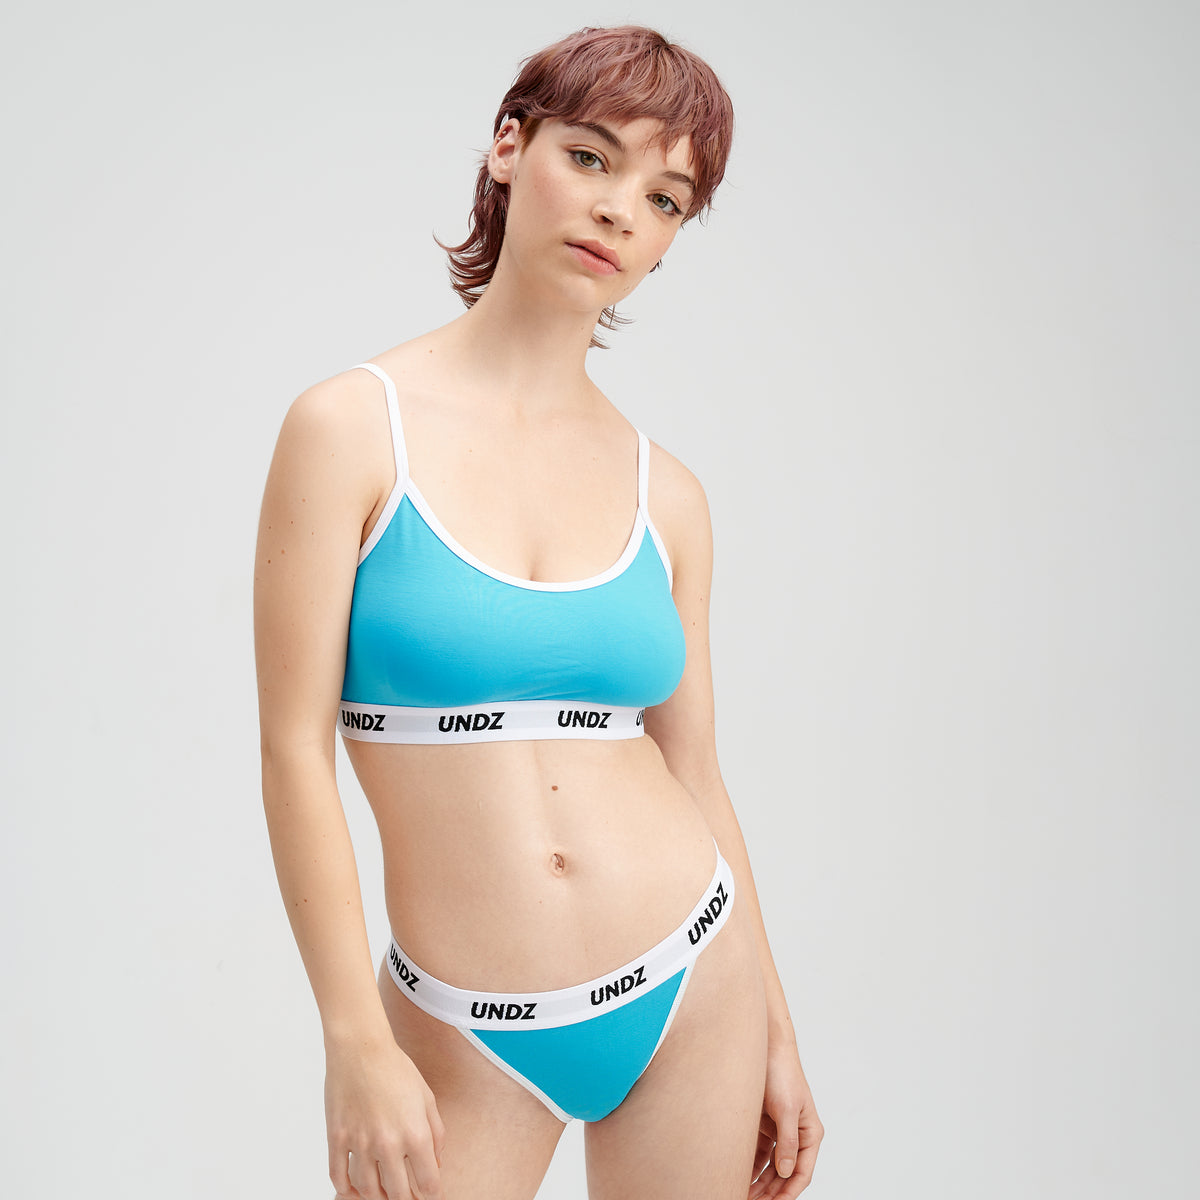 WOMEN SPORTS BRA BAMBOO BLEU UNDZ . Take a look at our featured items